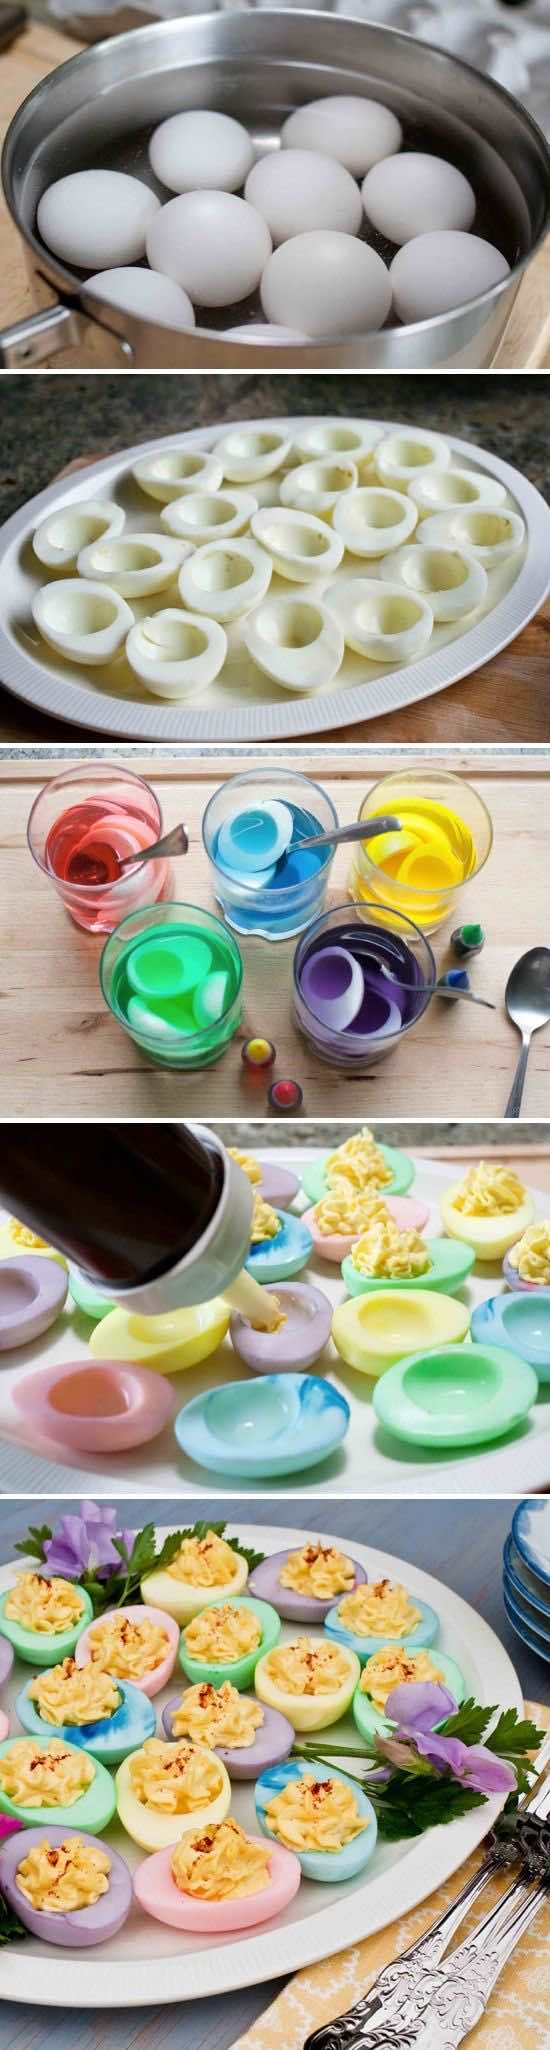 Delicious-colorful-Easter-eggs